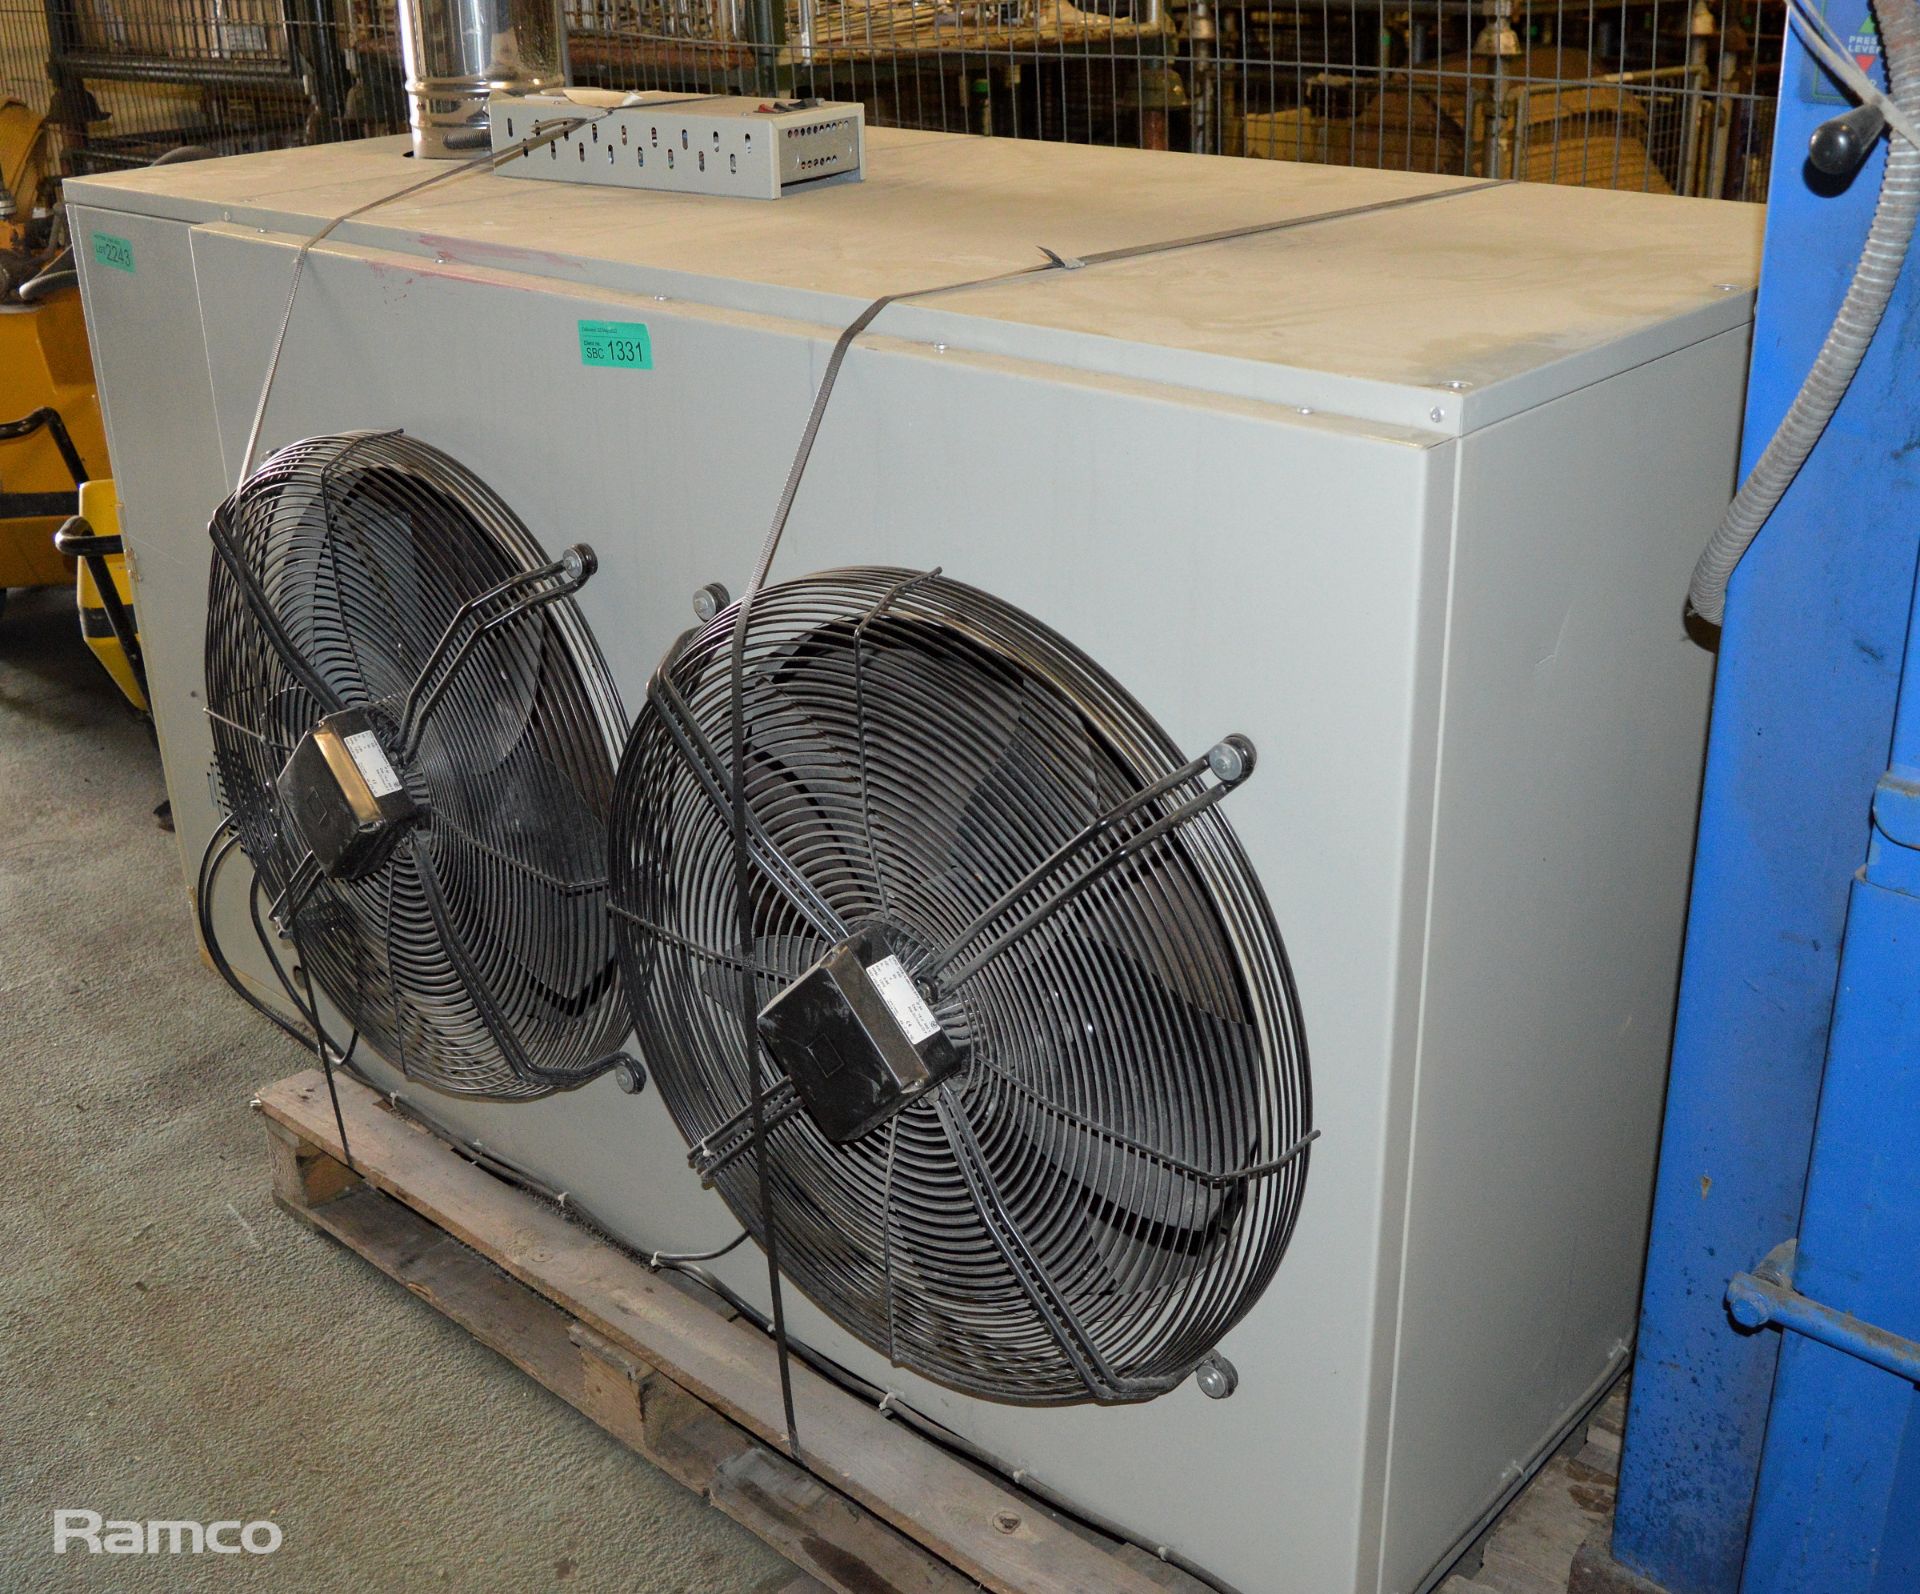 Benson oil fired unit heater - model OUHC350 - type B23 - Image 3 of 5